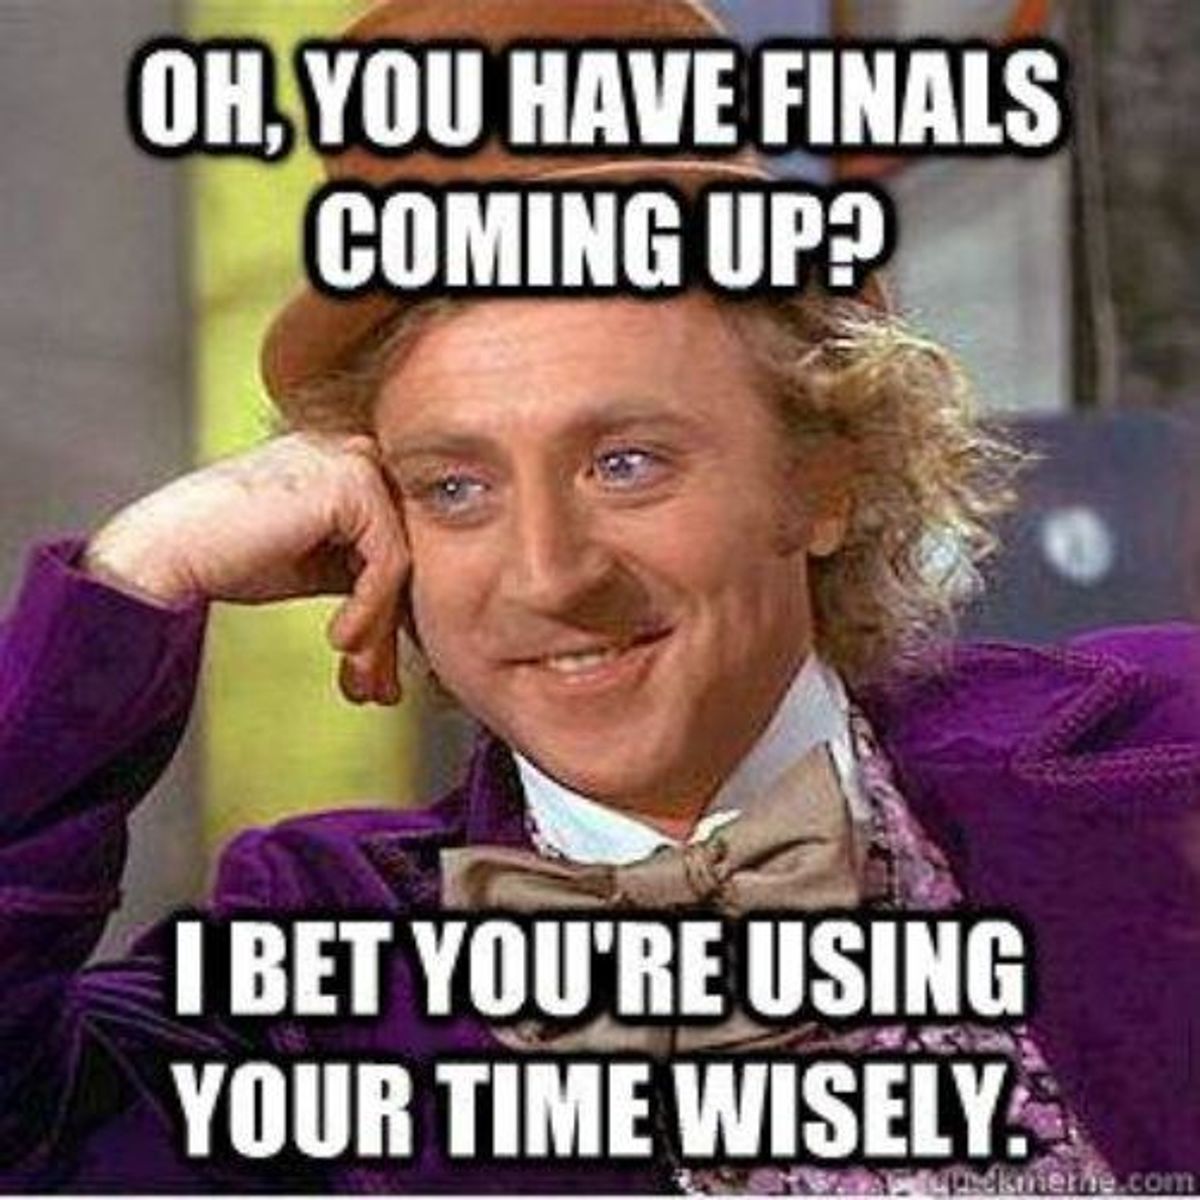 5 Things That Will Keep You Calm For Finals Week